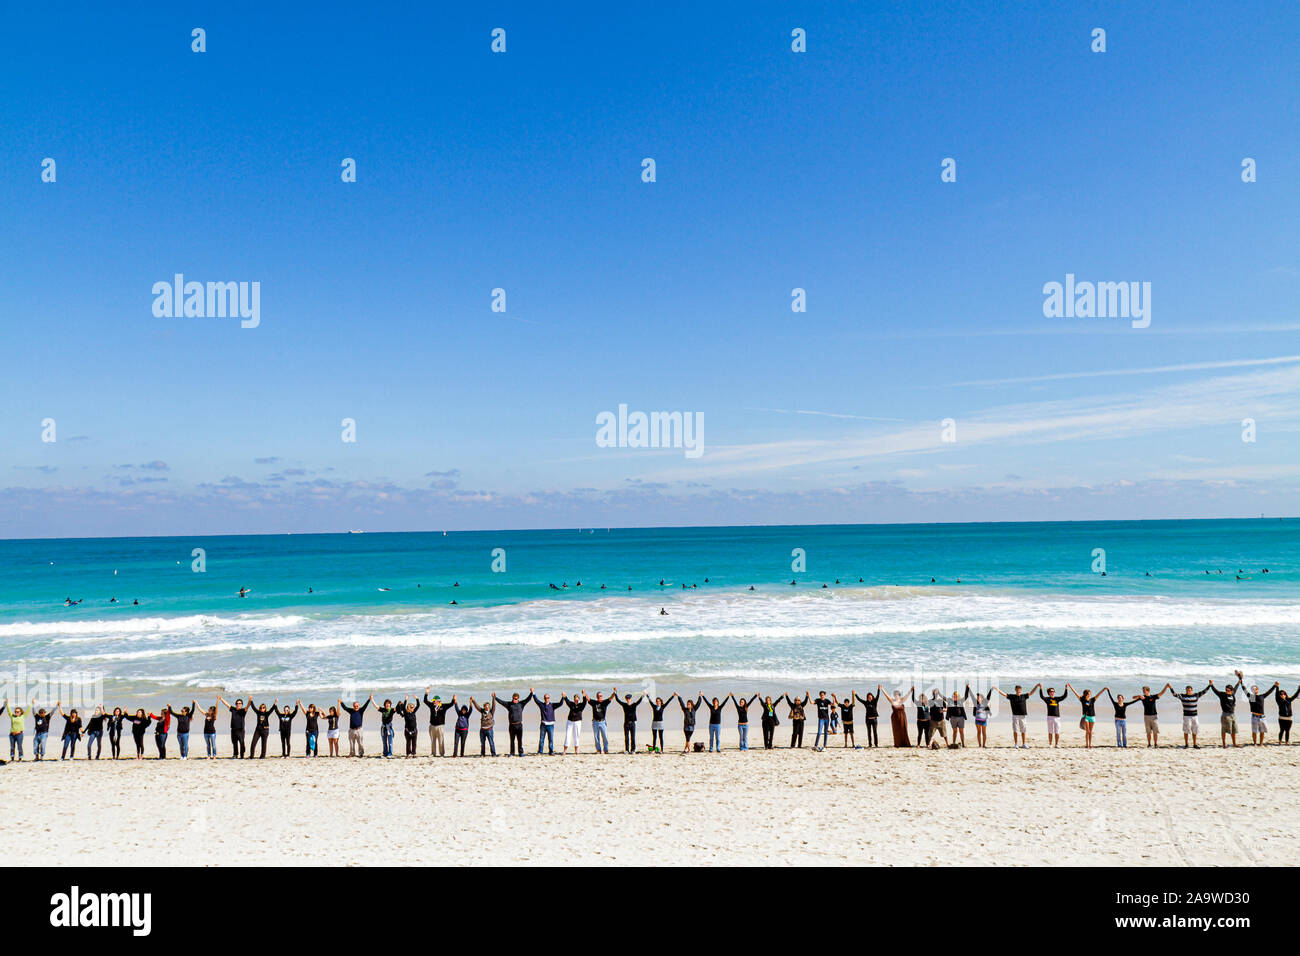 Miami Beach Florida,Surfrider Foundation,No Offshore Florida Oil Drilling Protest,Black clothing represents oil,hold hand,hands,unity,Atlantic Ocean,w Stock Photo